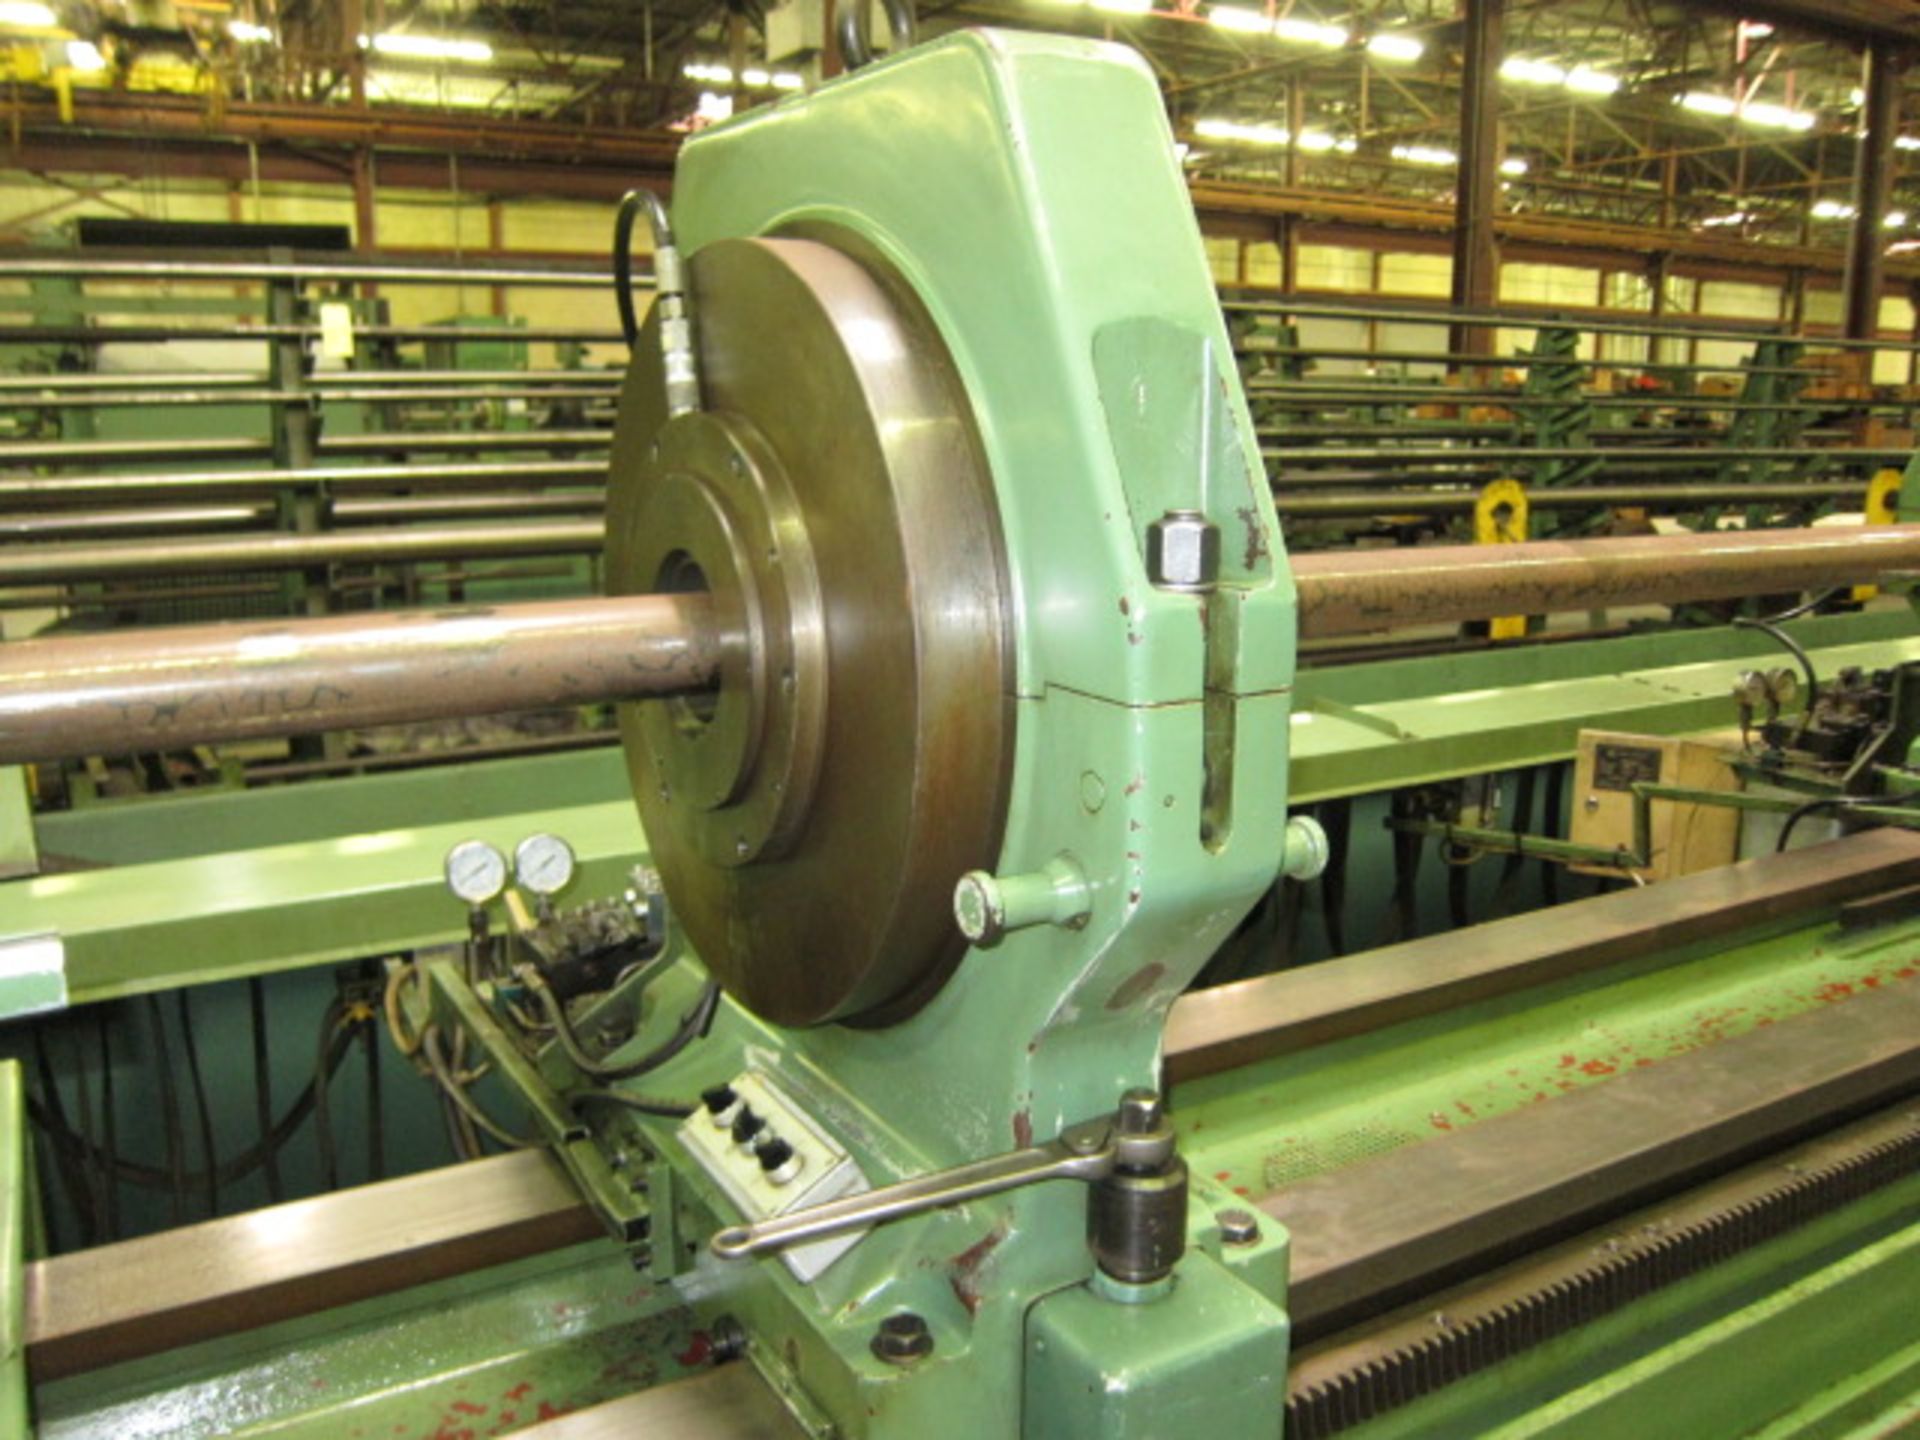 COUNTER ROTATING DEEP HOLE BORING MACHINE, WOHLENBERG MDL. PB2-1000 X 11M, new 1988, 39.37” sw. over - Image 10 of 31